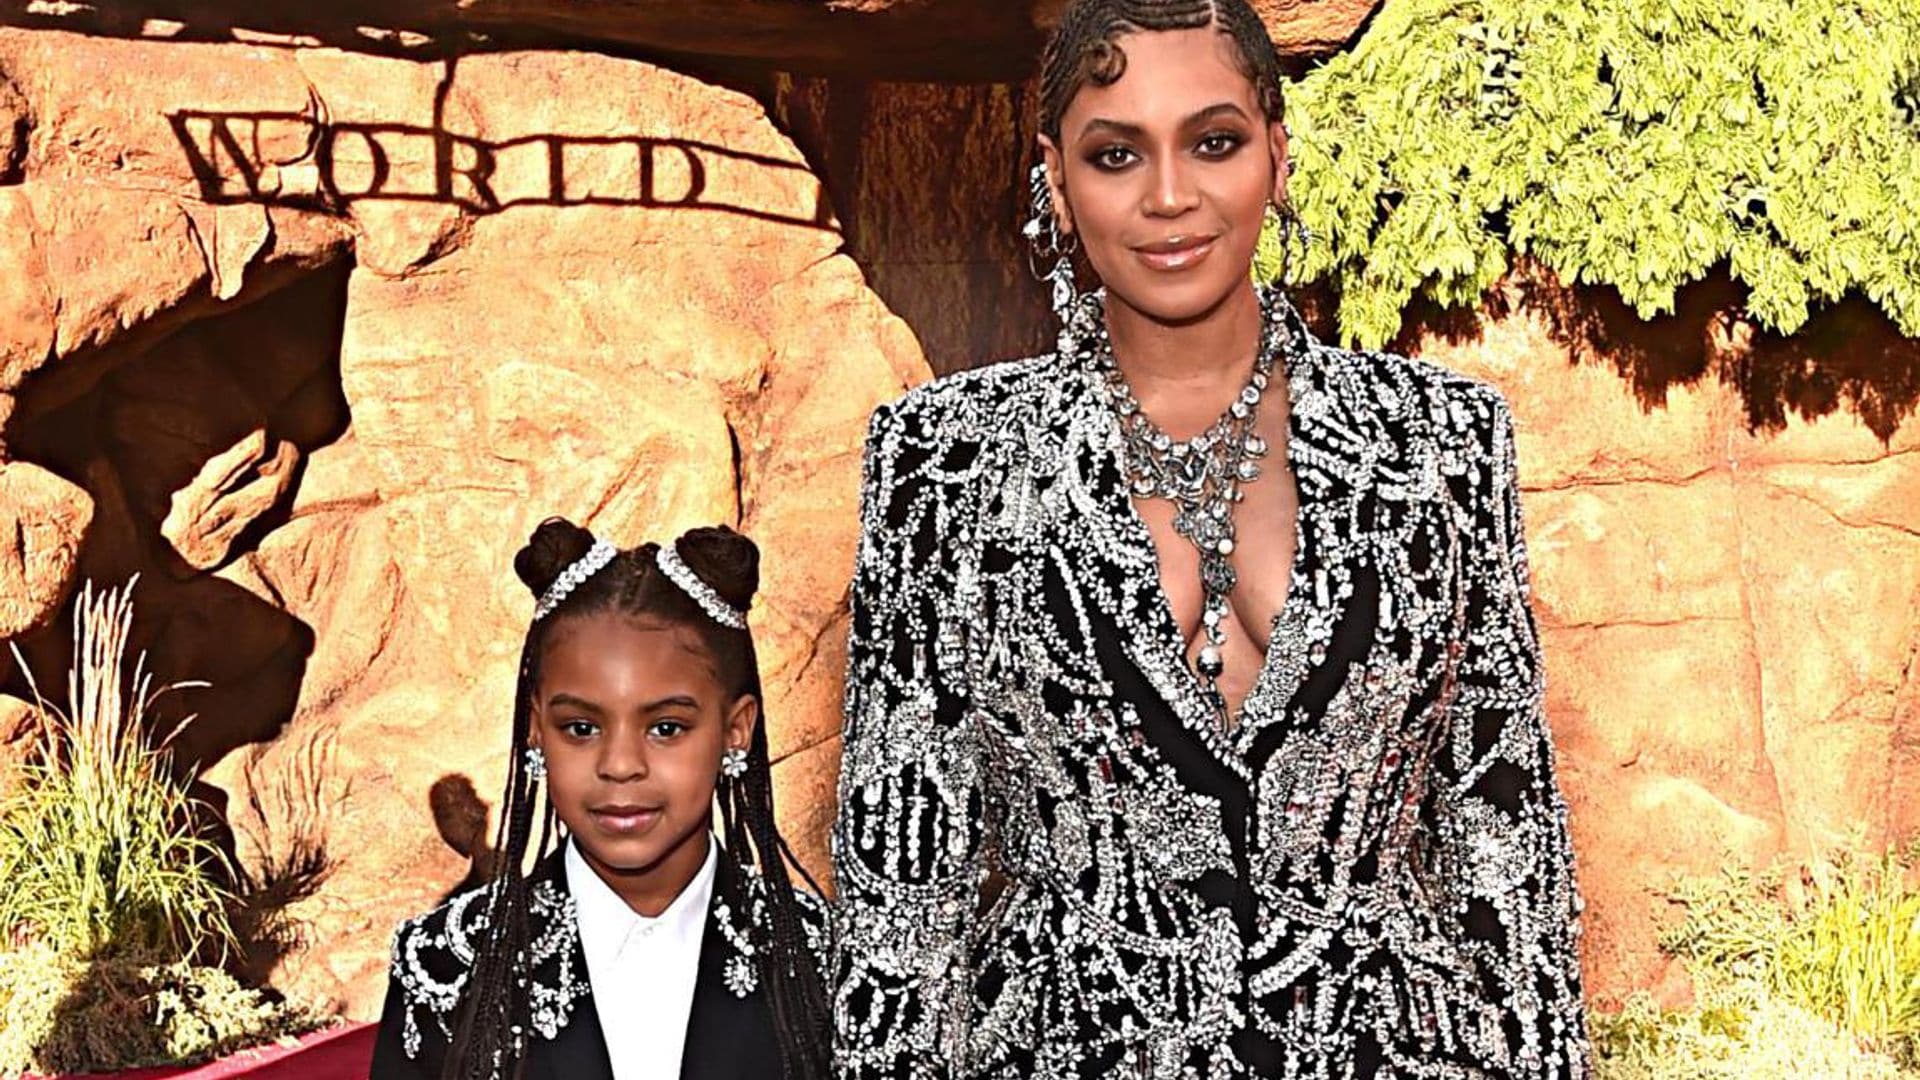 Beyoncé’s daughter Blue Ivy’s new exciting gig revealed